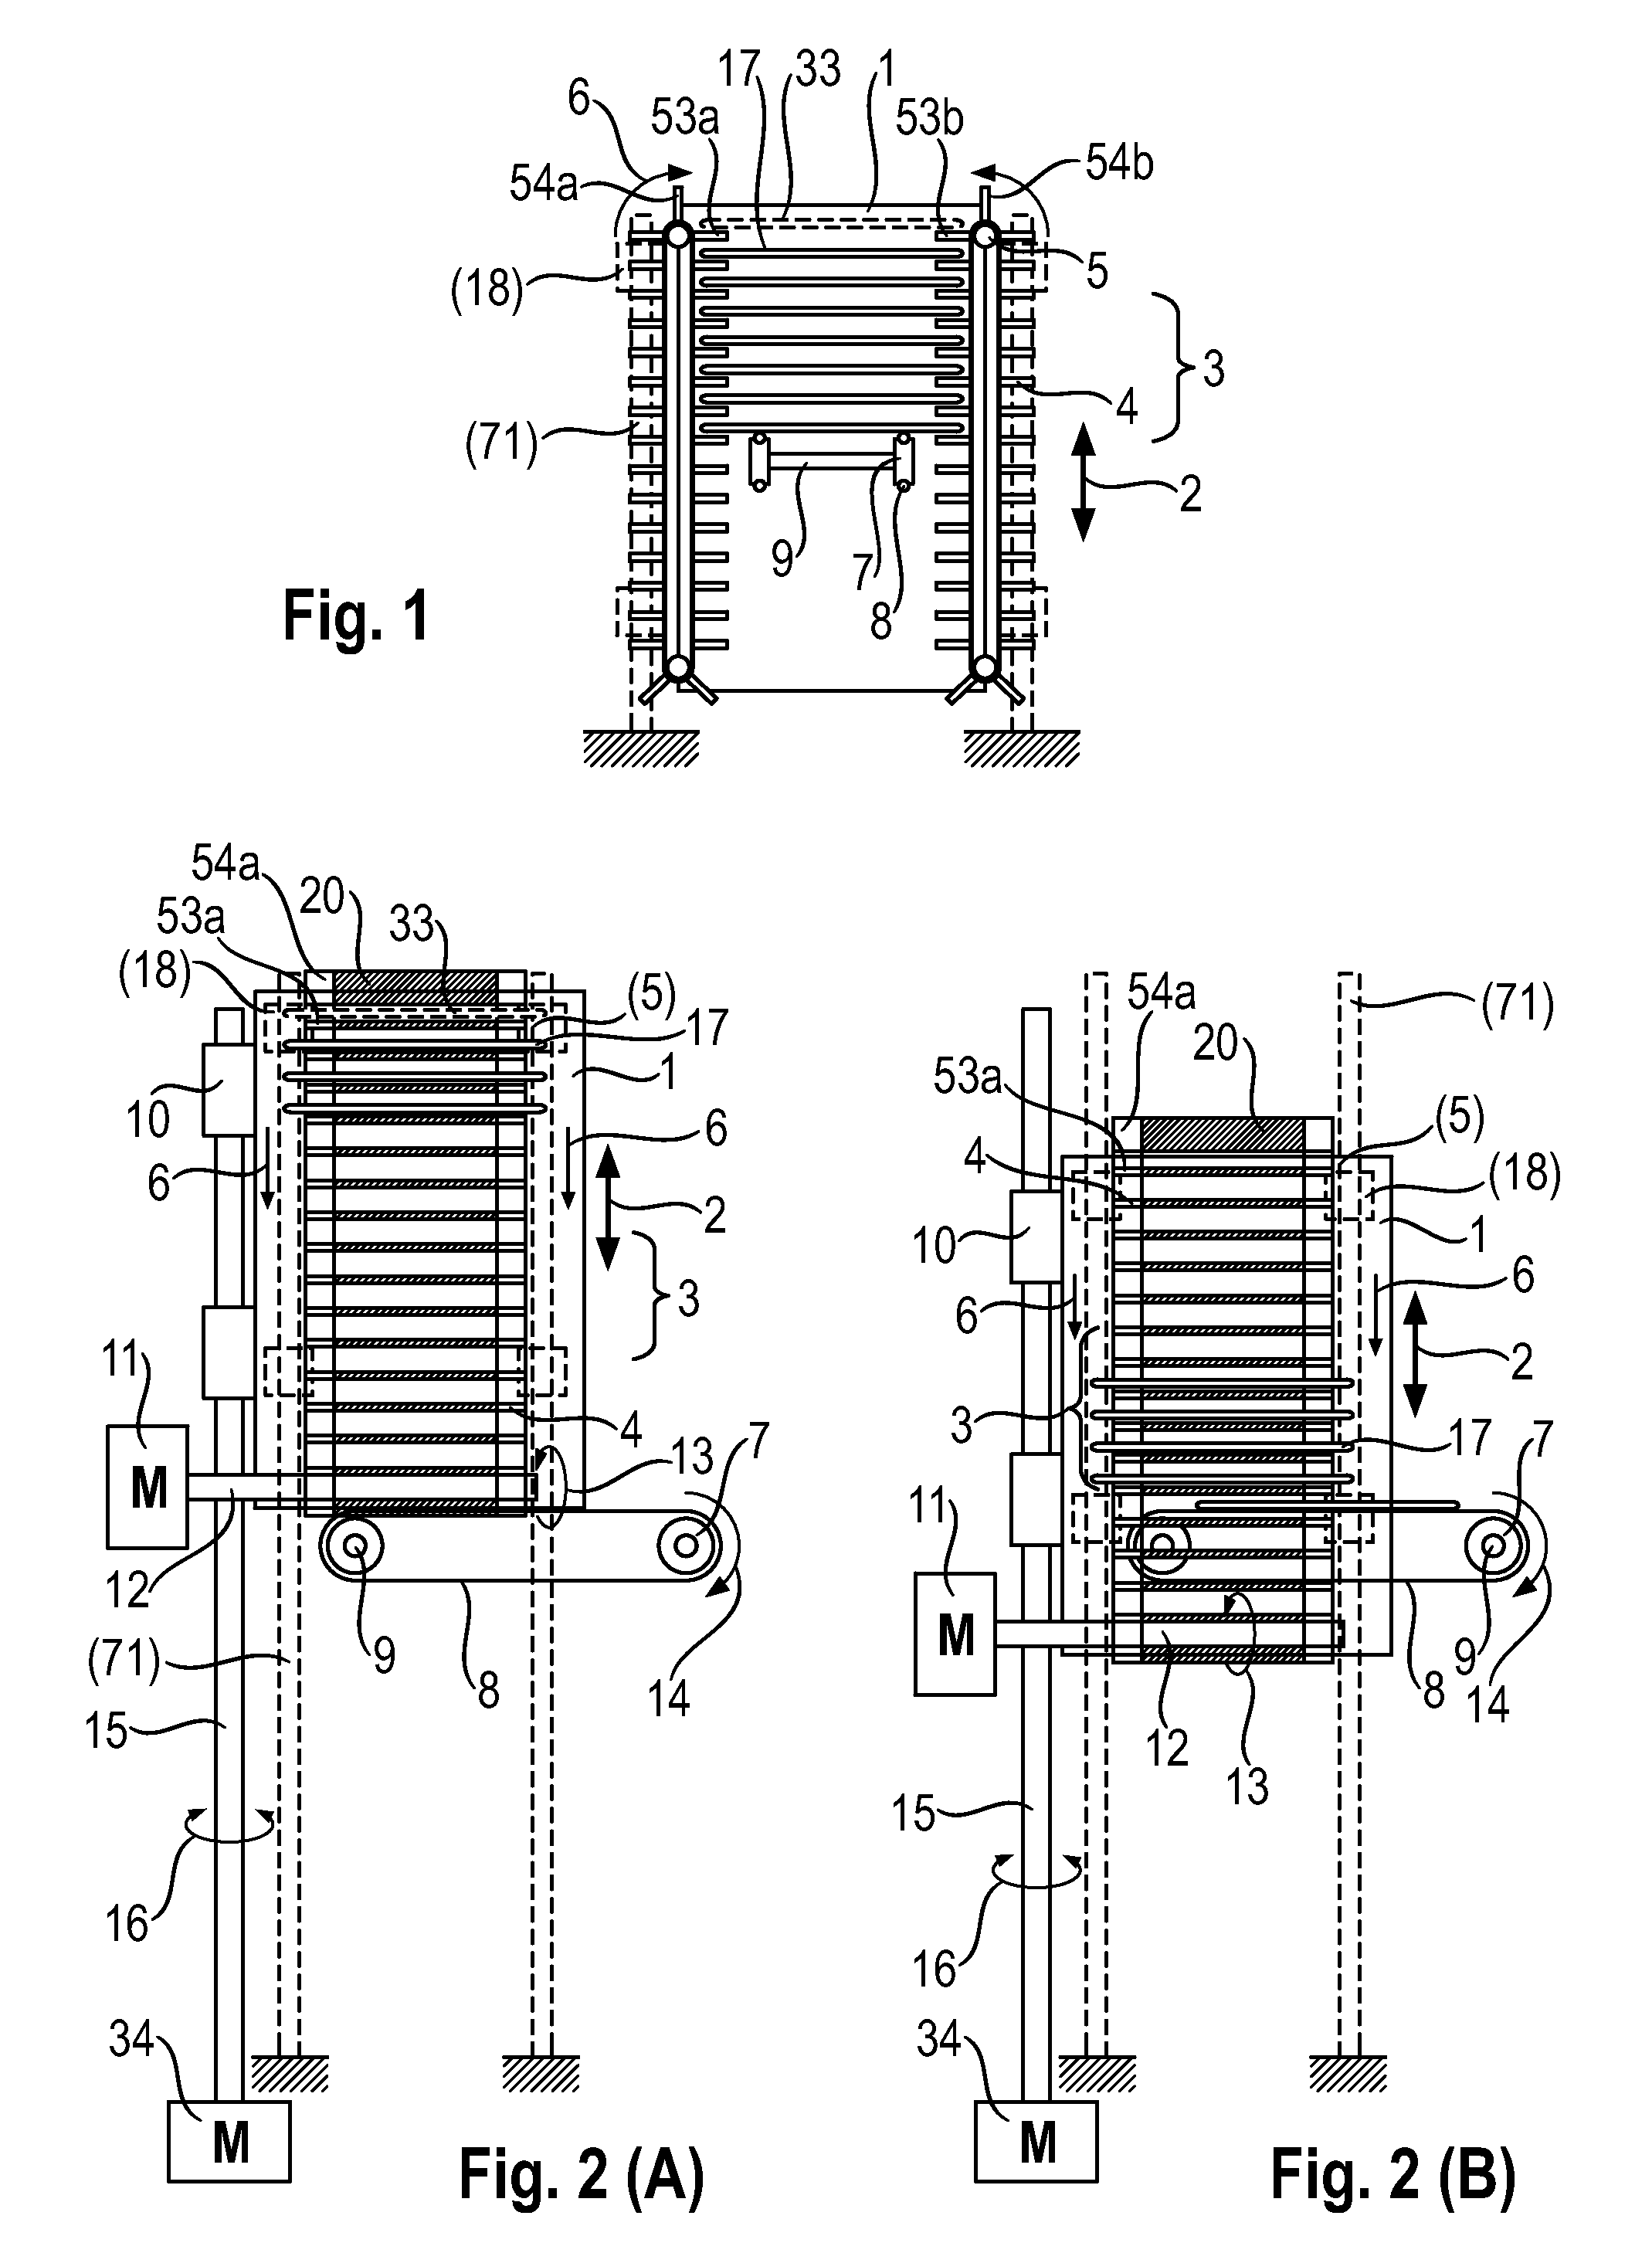 Device and method for buffer-storing a multiplicity of wafer-type workpieces